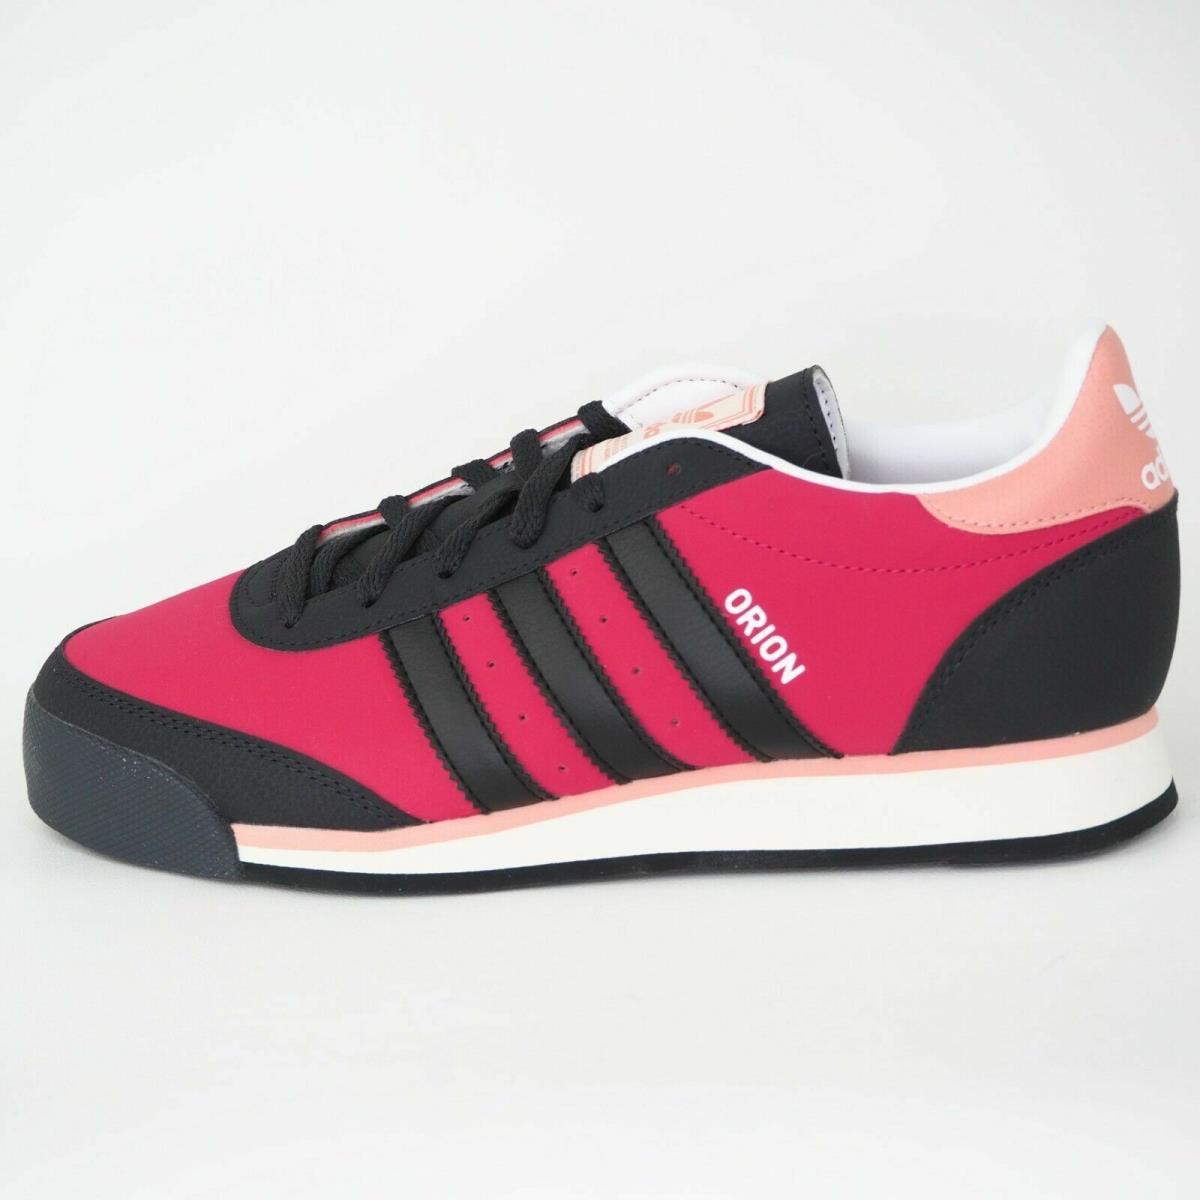 Adidas shoes Orion - Pink 0